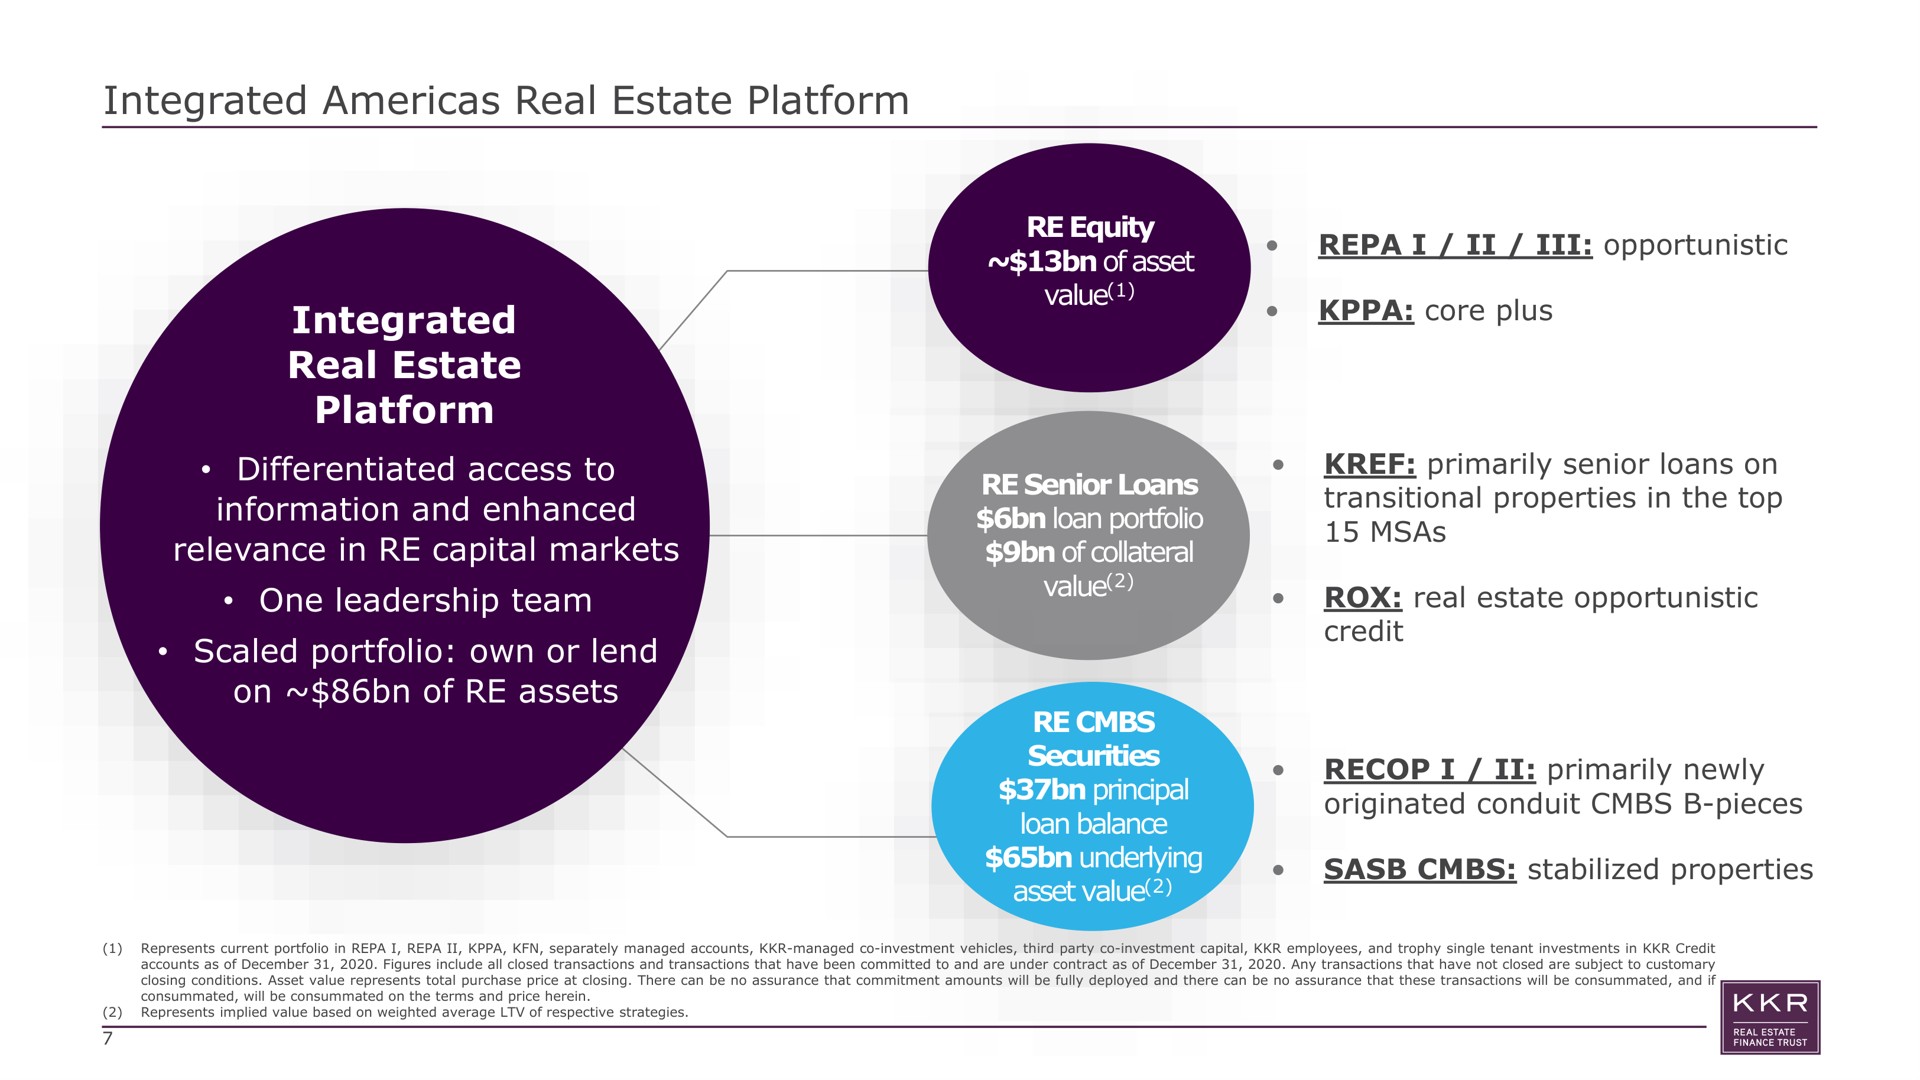 integrated real estate platform integrated real estate platform differentiated access to information and enhanced relevance in capital markets one leadership team scaled portfolio own or lend on of assets equity of asset value i opportunistic core plus senior loans loan portfolio of collateral value primarily senior loans on transitional properties in the top rox real estate opportunistic credit securities principal loan balance underlying asset value i primarily newly originated conduit pieces stabilized properties if | KKR Real Estate Finance Trust